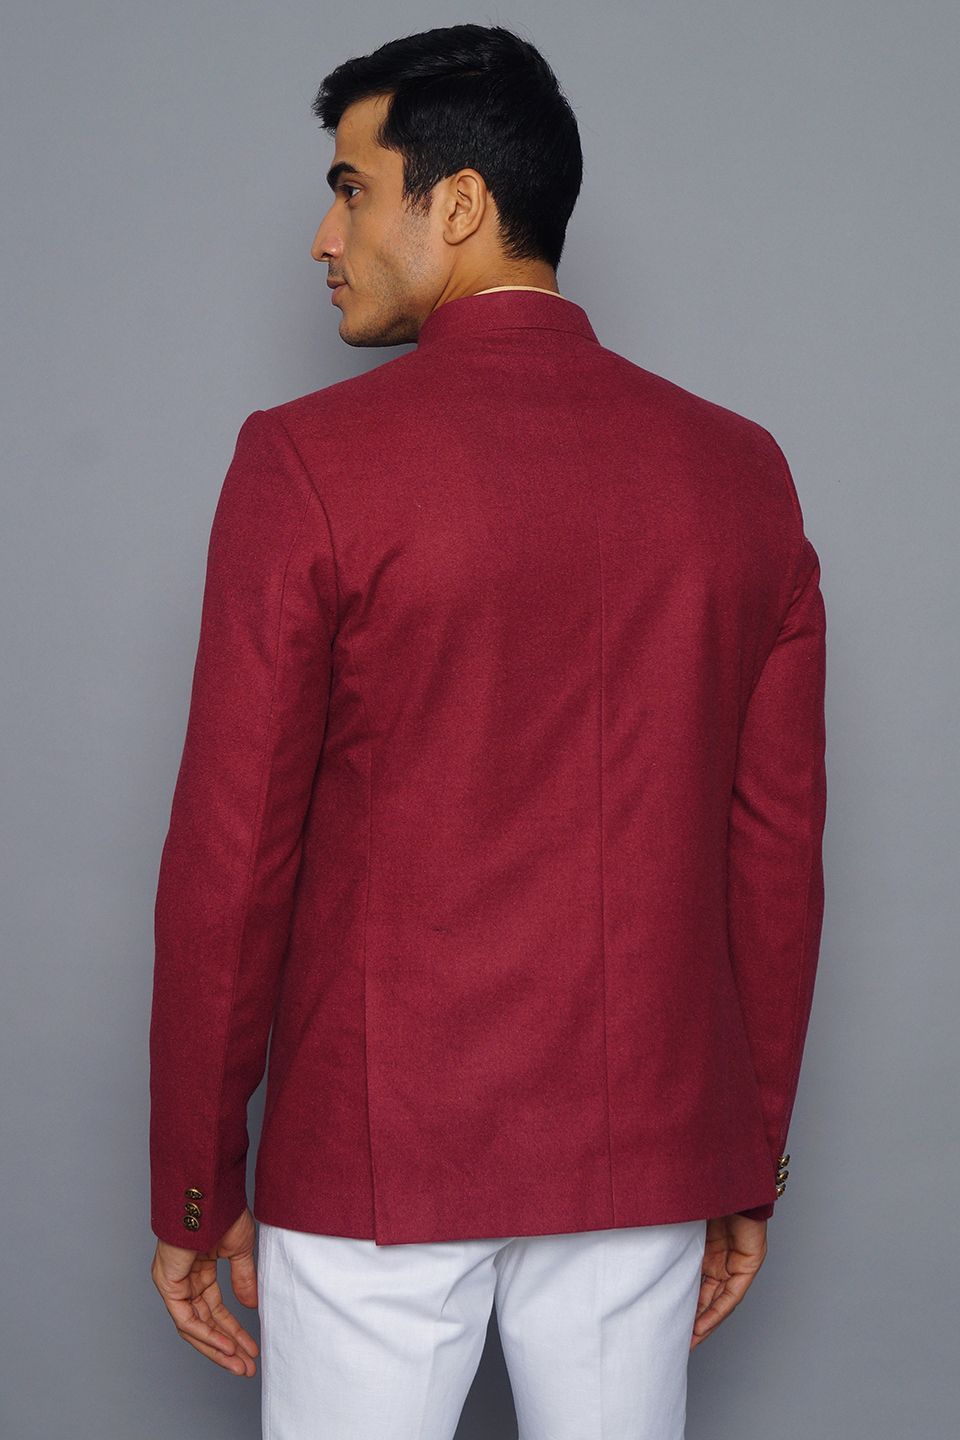 Wintage Men's Wool Casual and Festive Bandhgala Blazer : Red